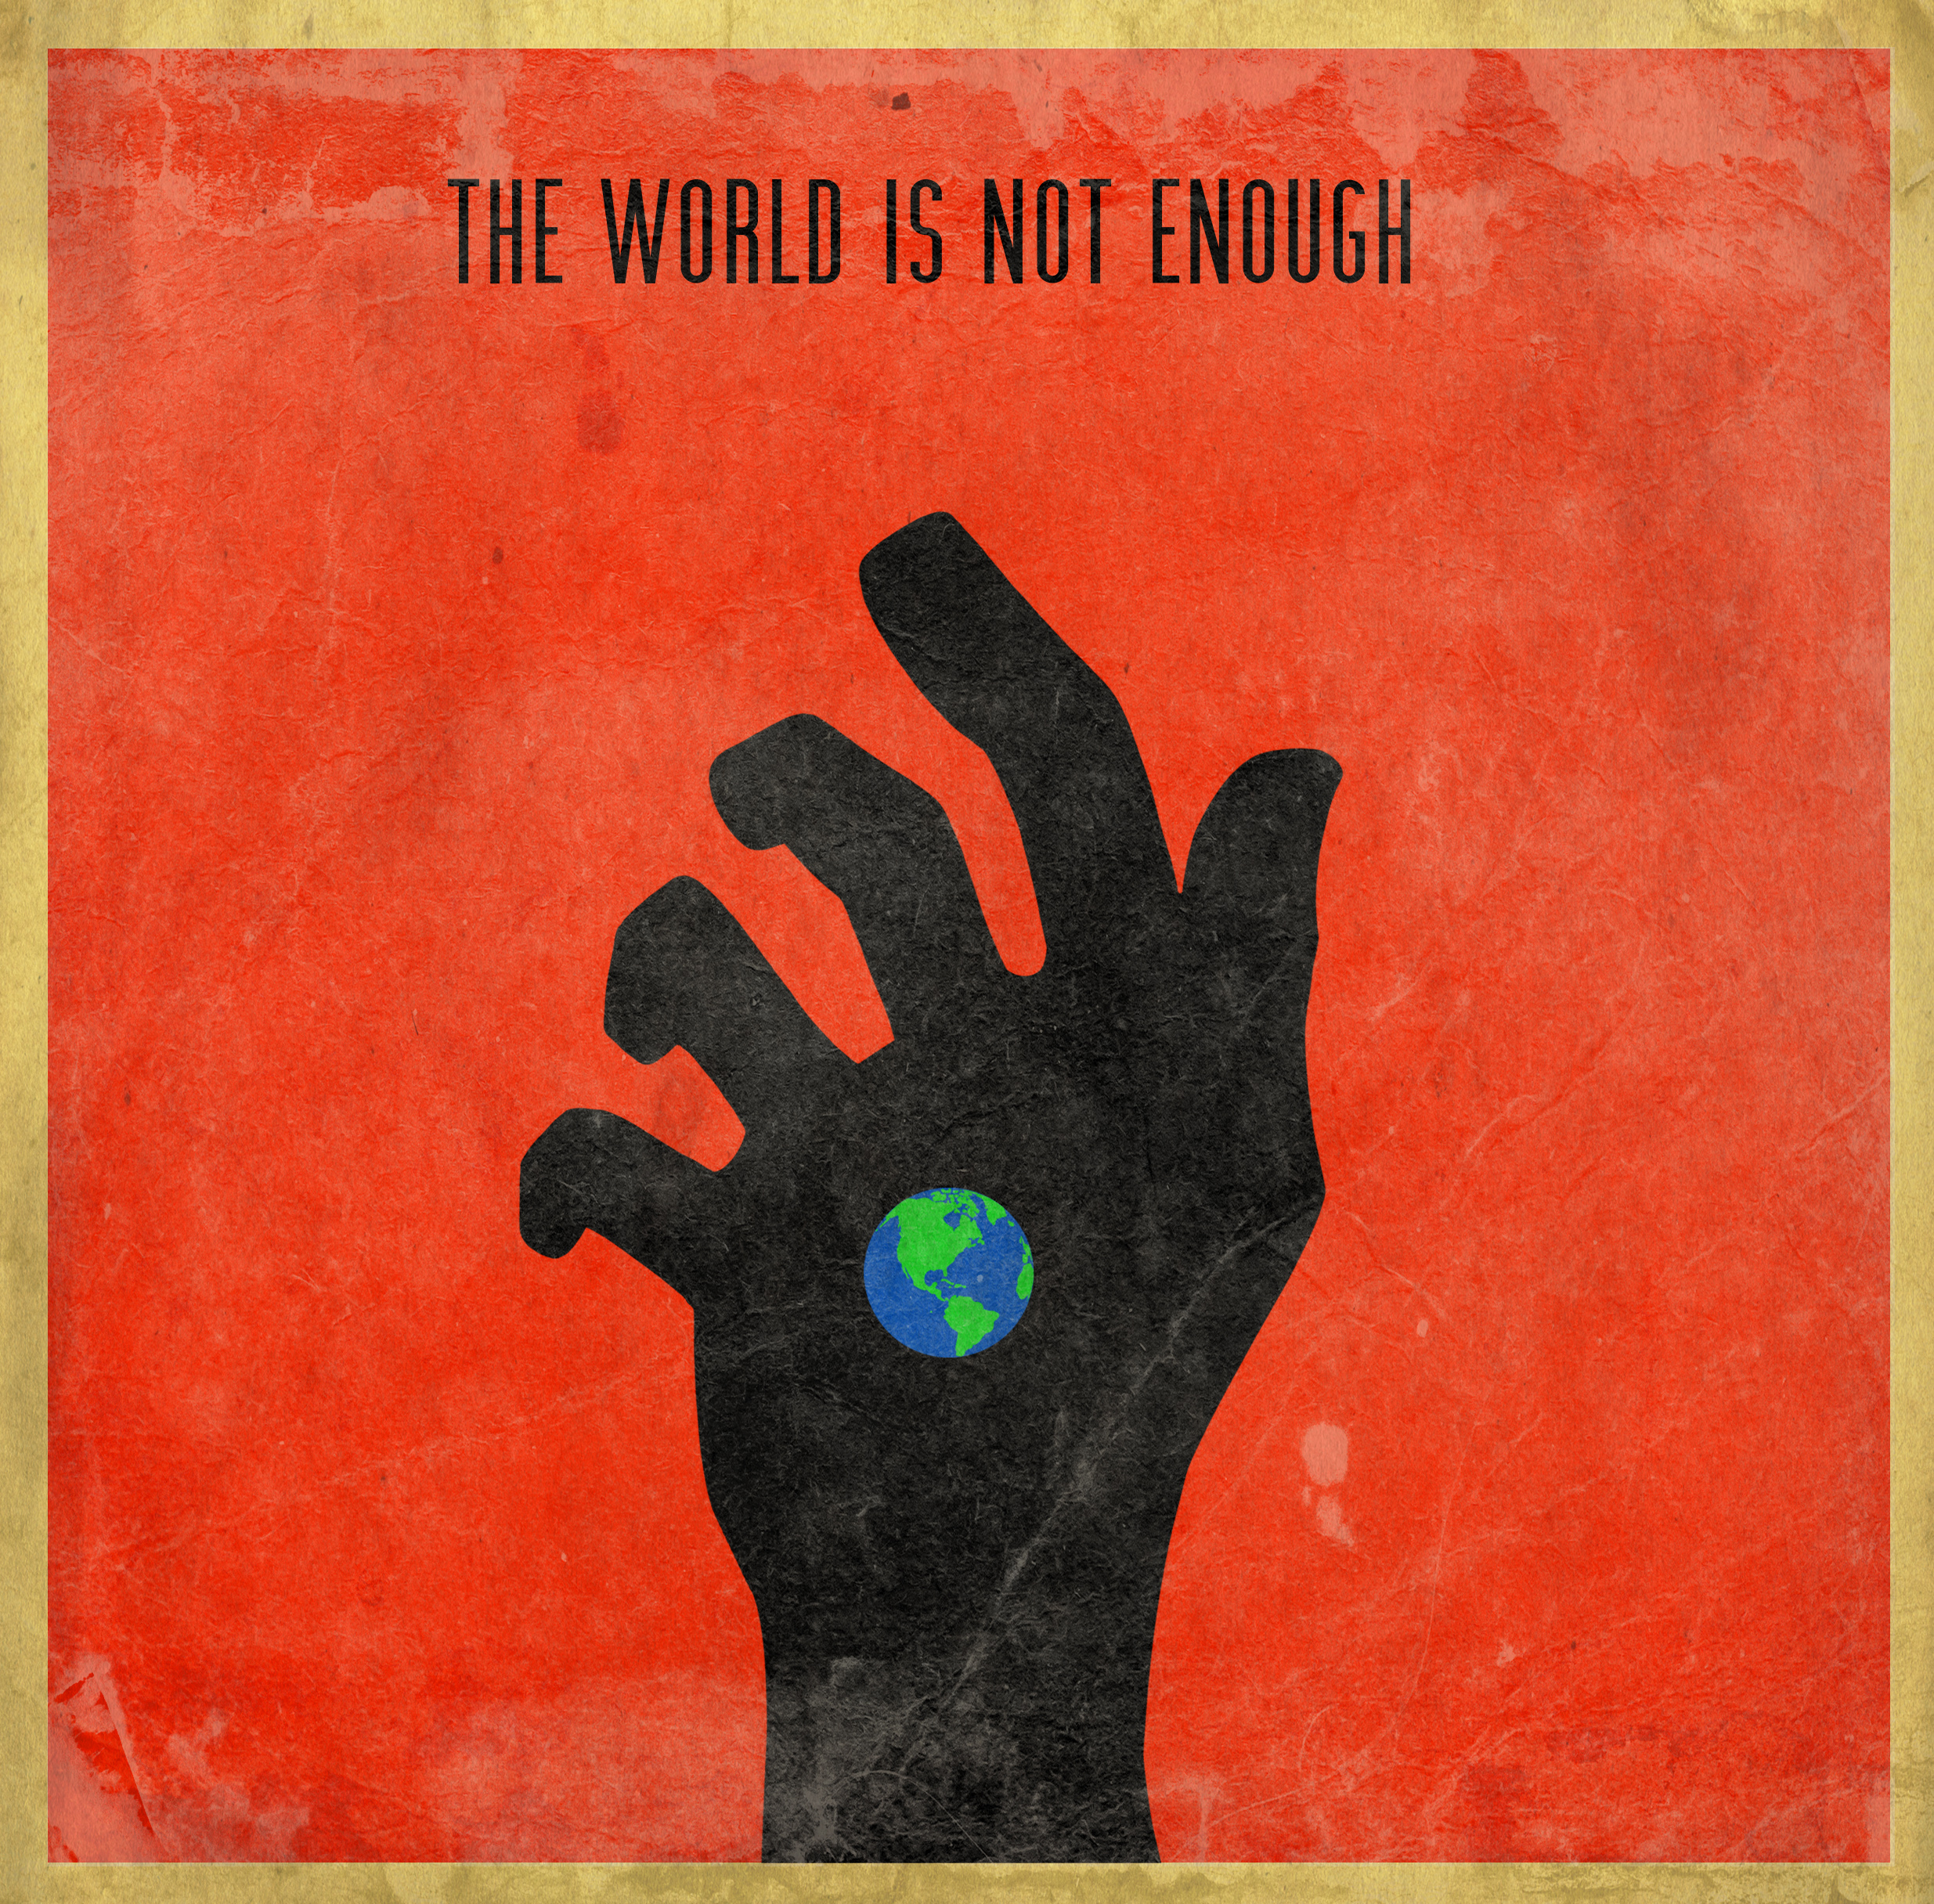 Life is not enough. Garbage the World is not enough. Not enough. 007 The World is not enough Garbage. Enough not enough.